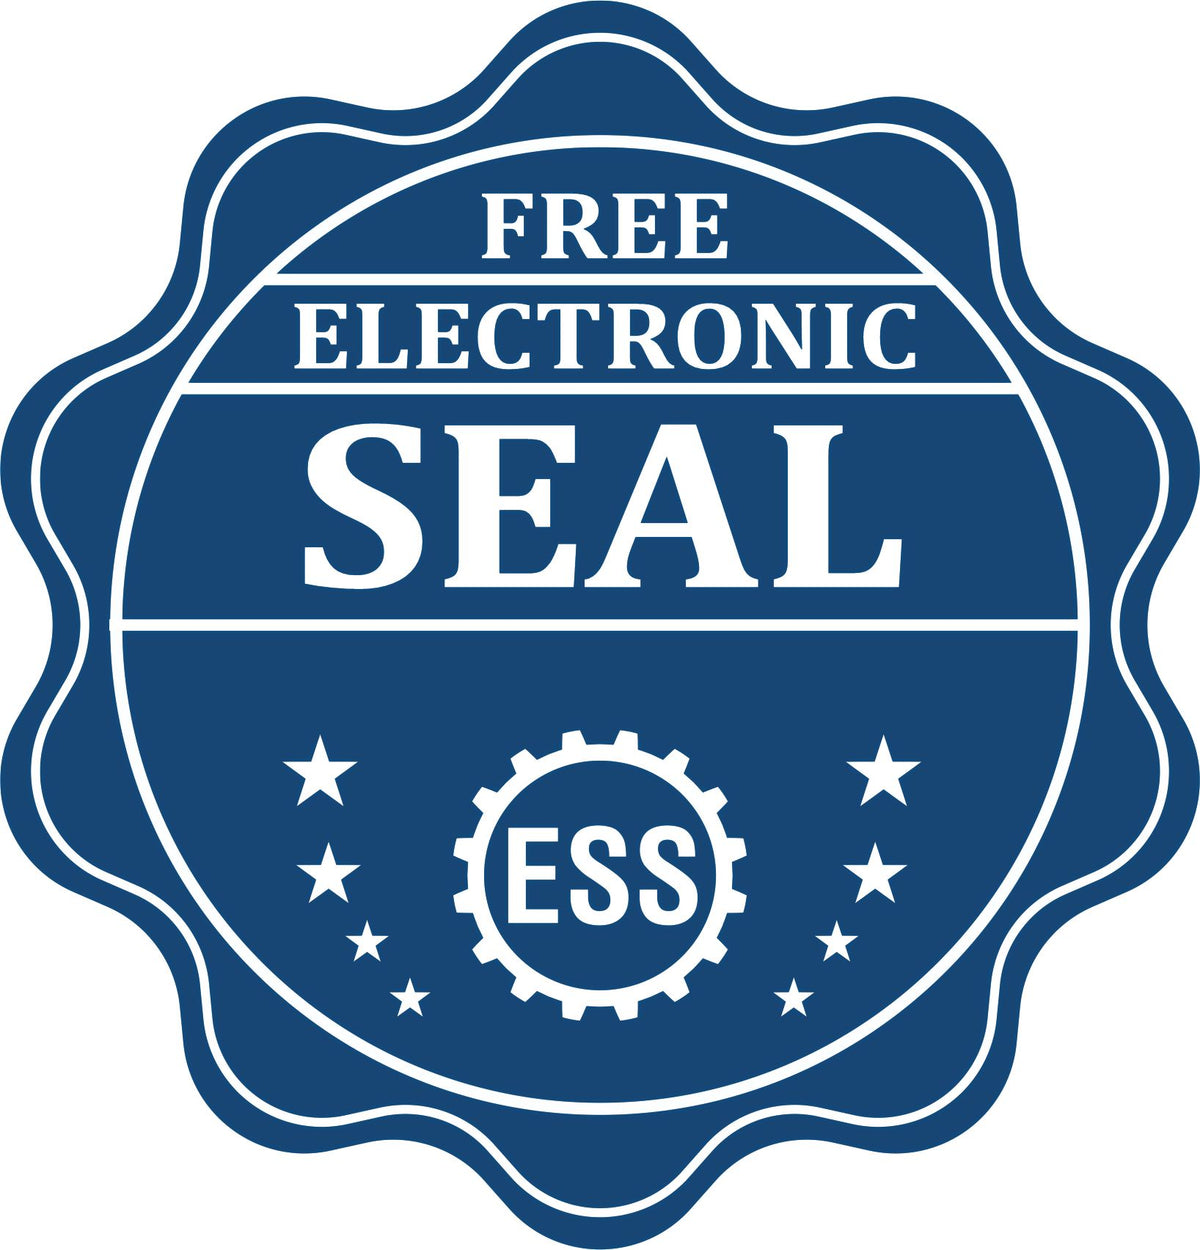 A badge showing a free electronic seal for the Slim Pre-Inked Nevada Architect Seal Stamp with stars and the ESS gear on the emblem.